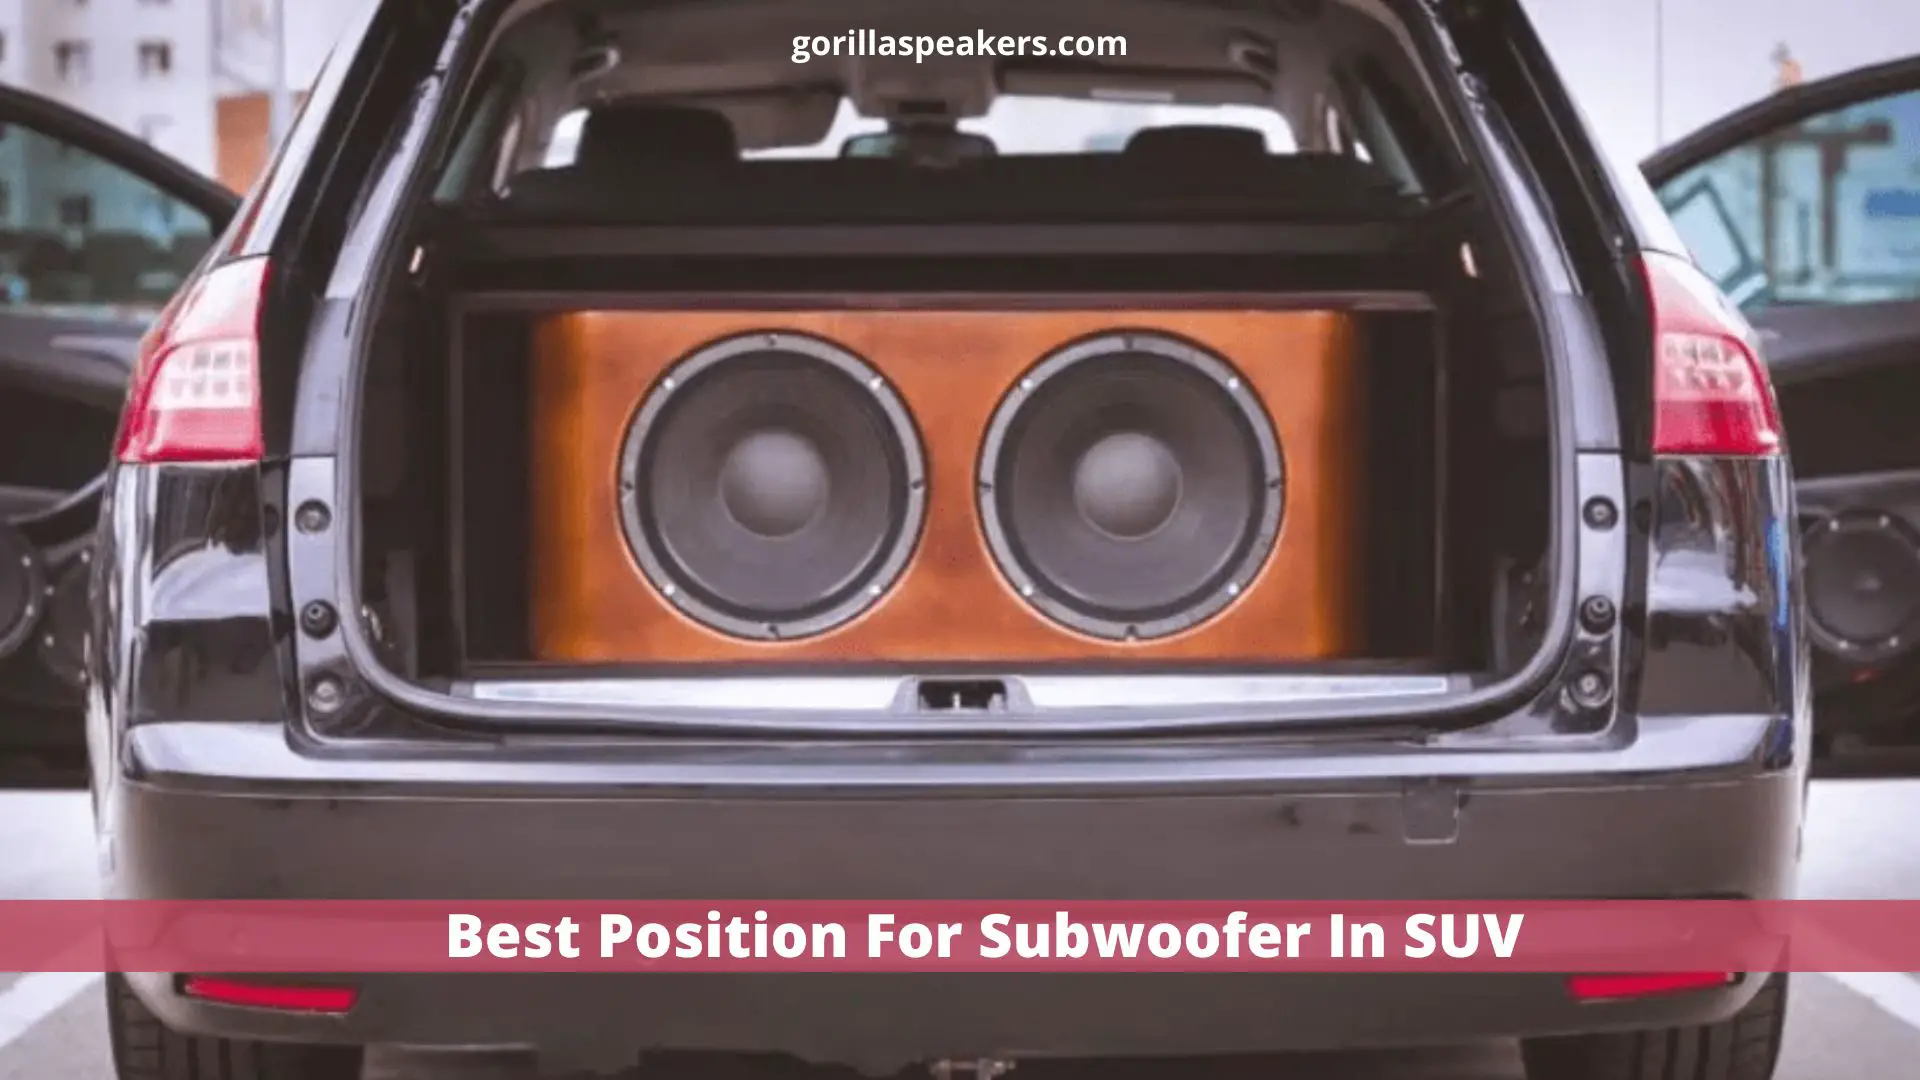 Best Position For Subwoofer In SUV